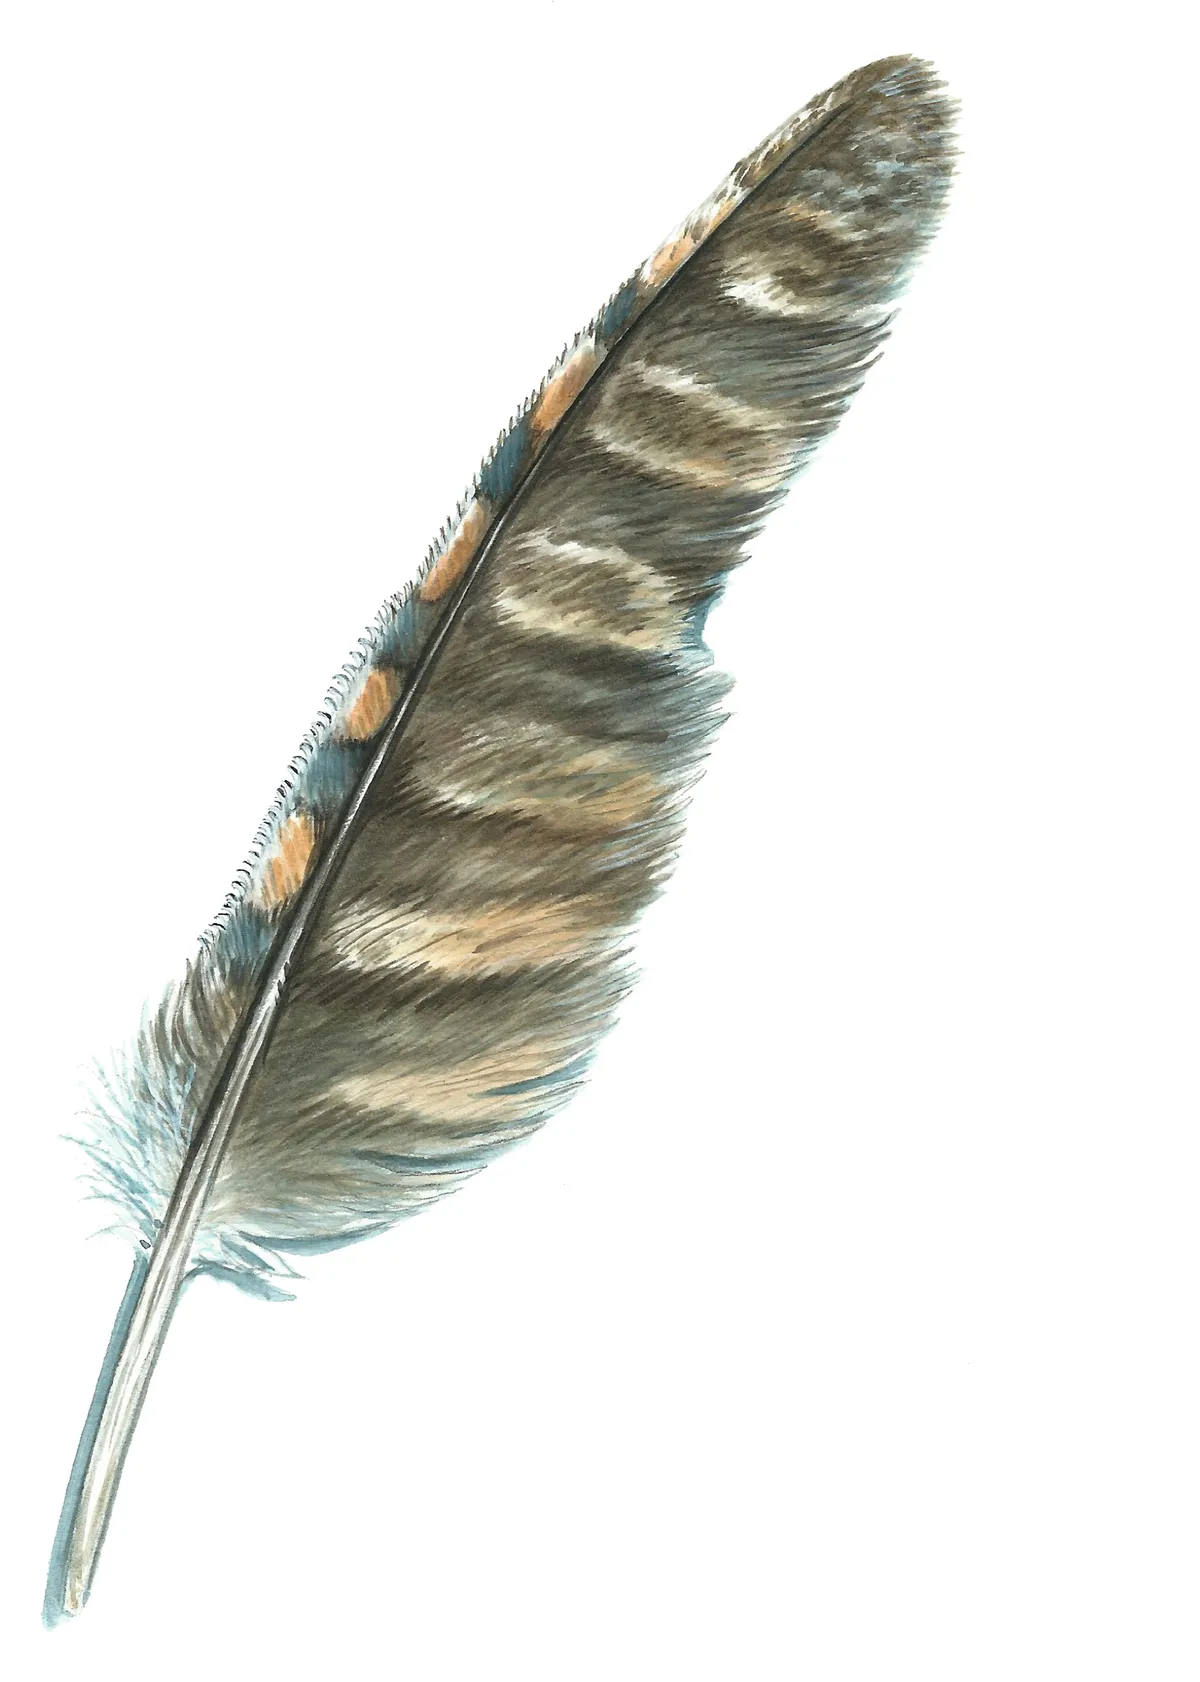 Tawny owl feather. © Mike Langman